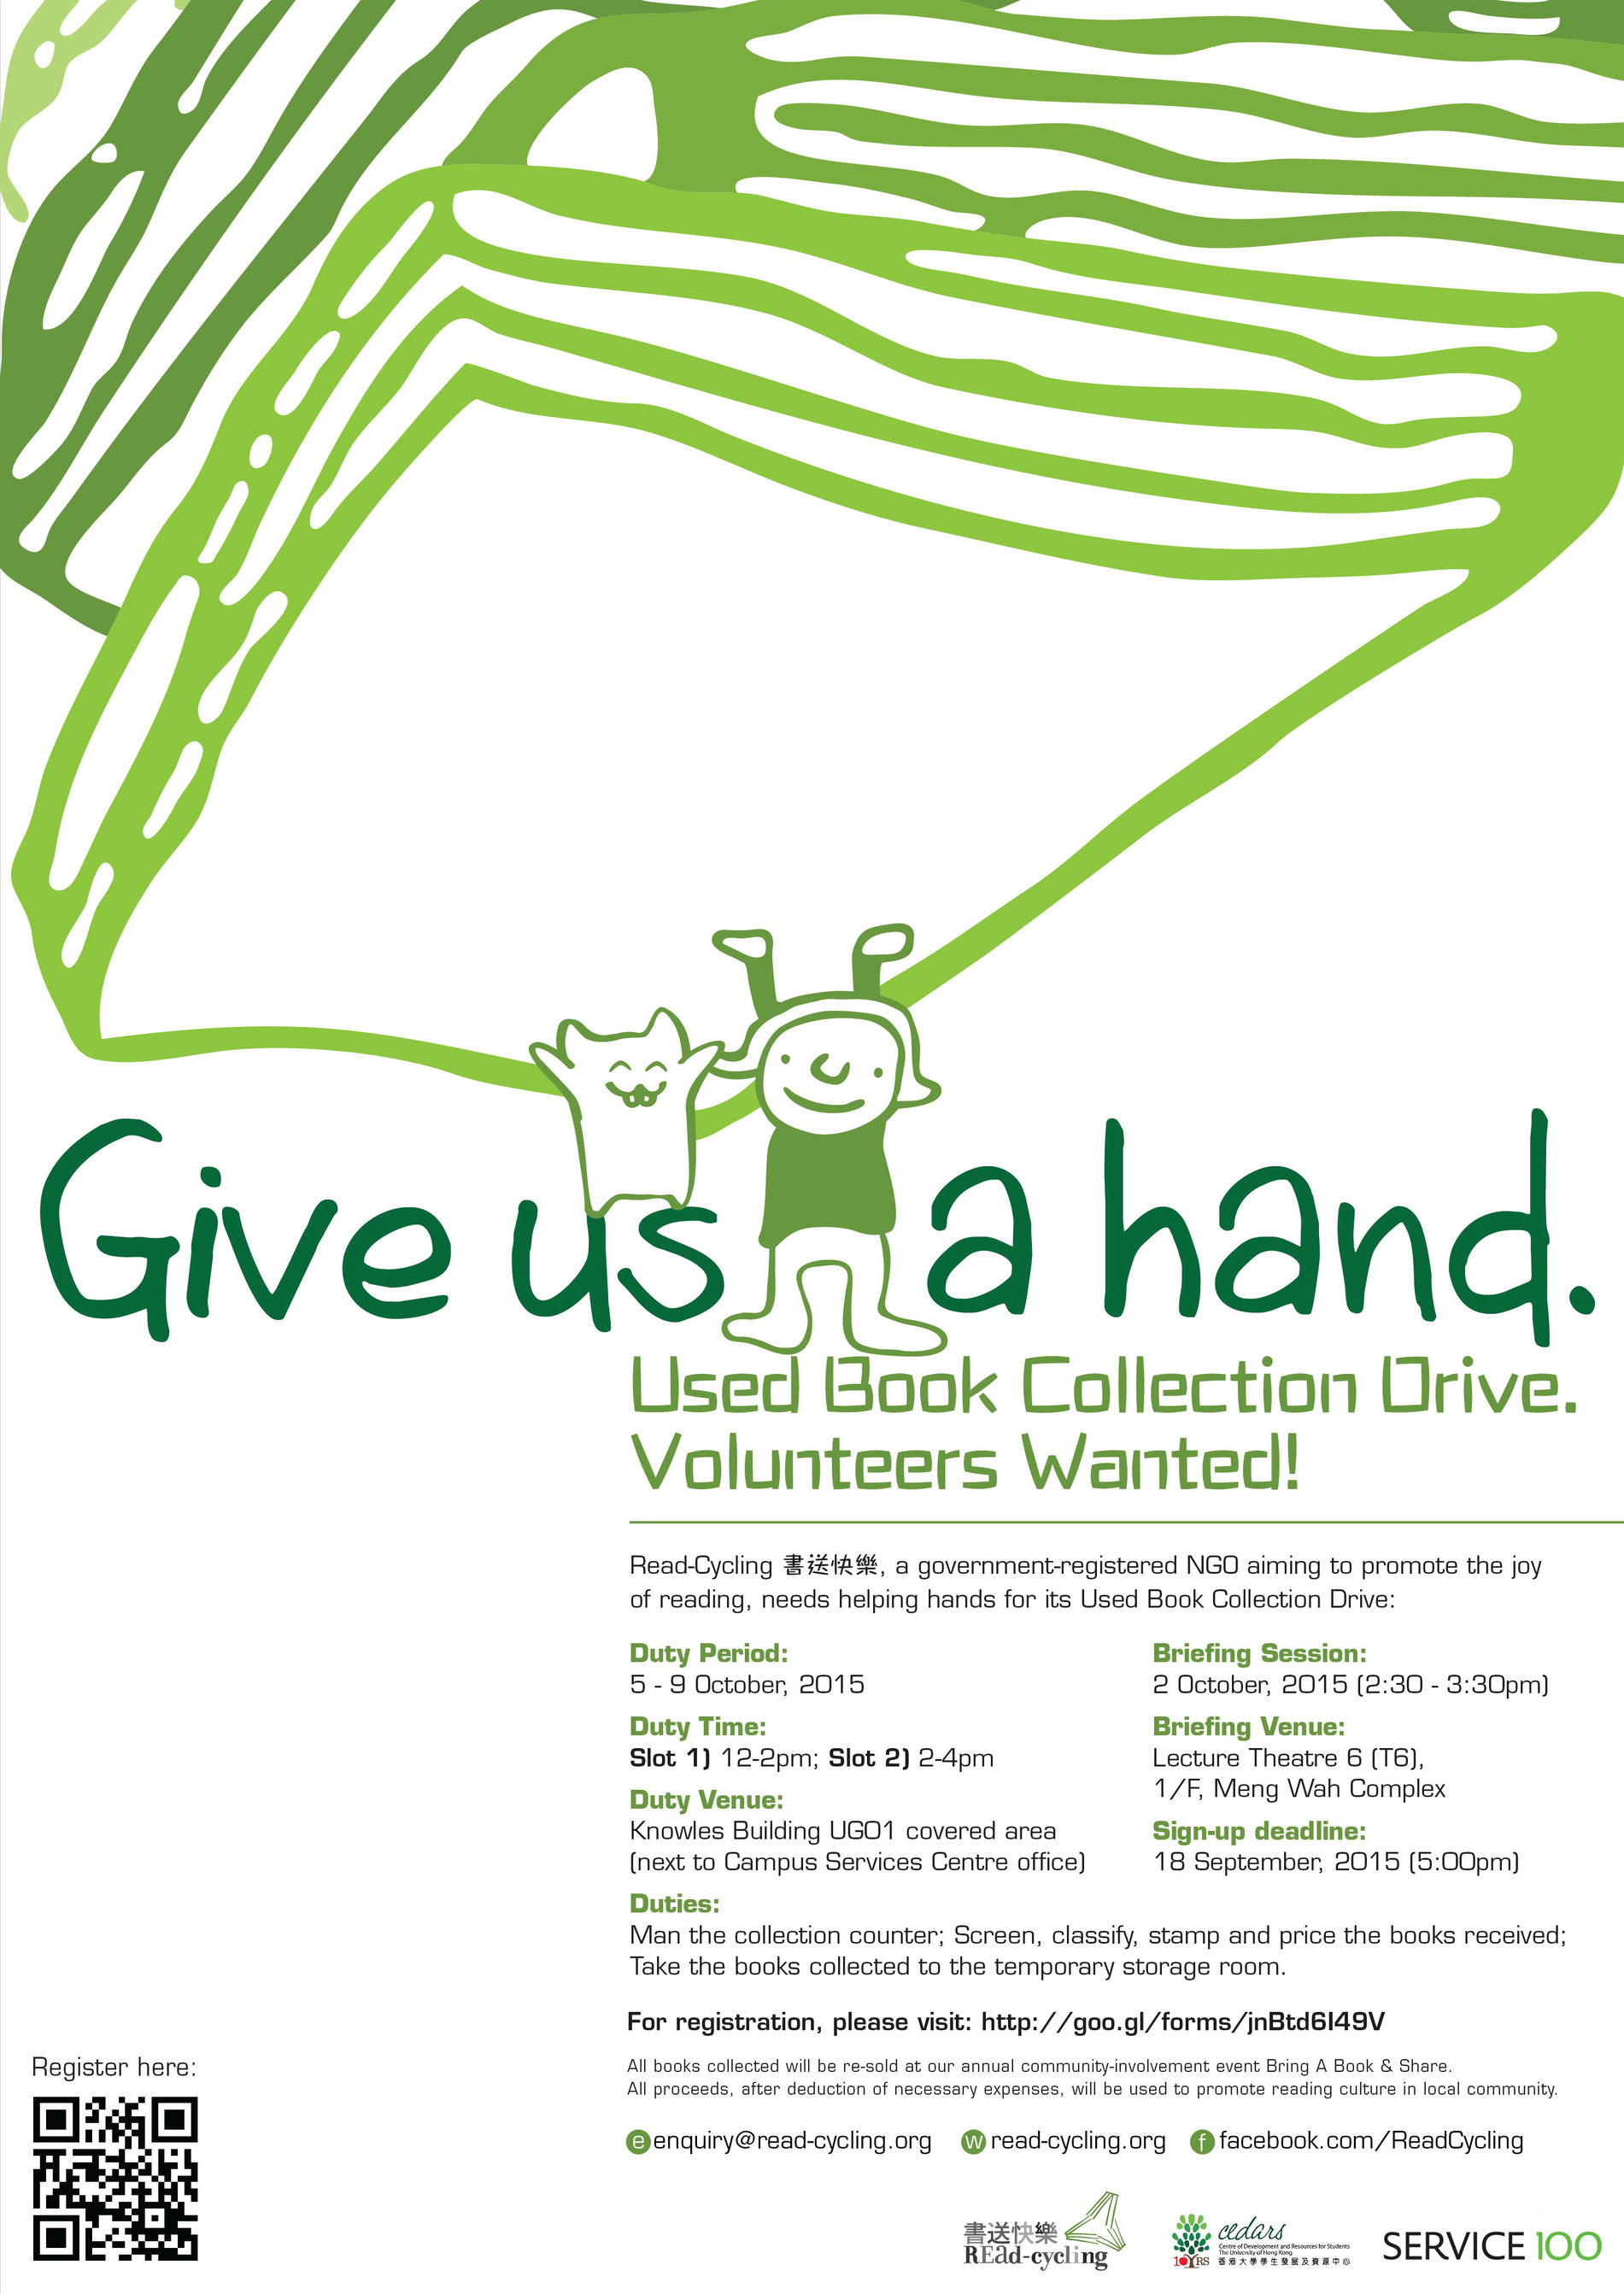 Volunteer Recruitment for Used Book Collection Drive of Read-Cycling